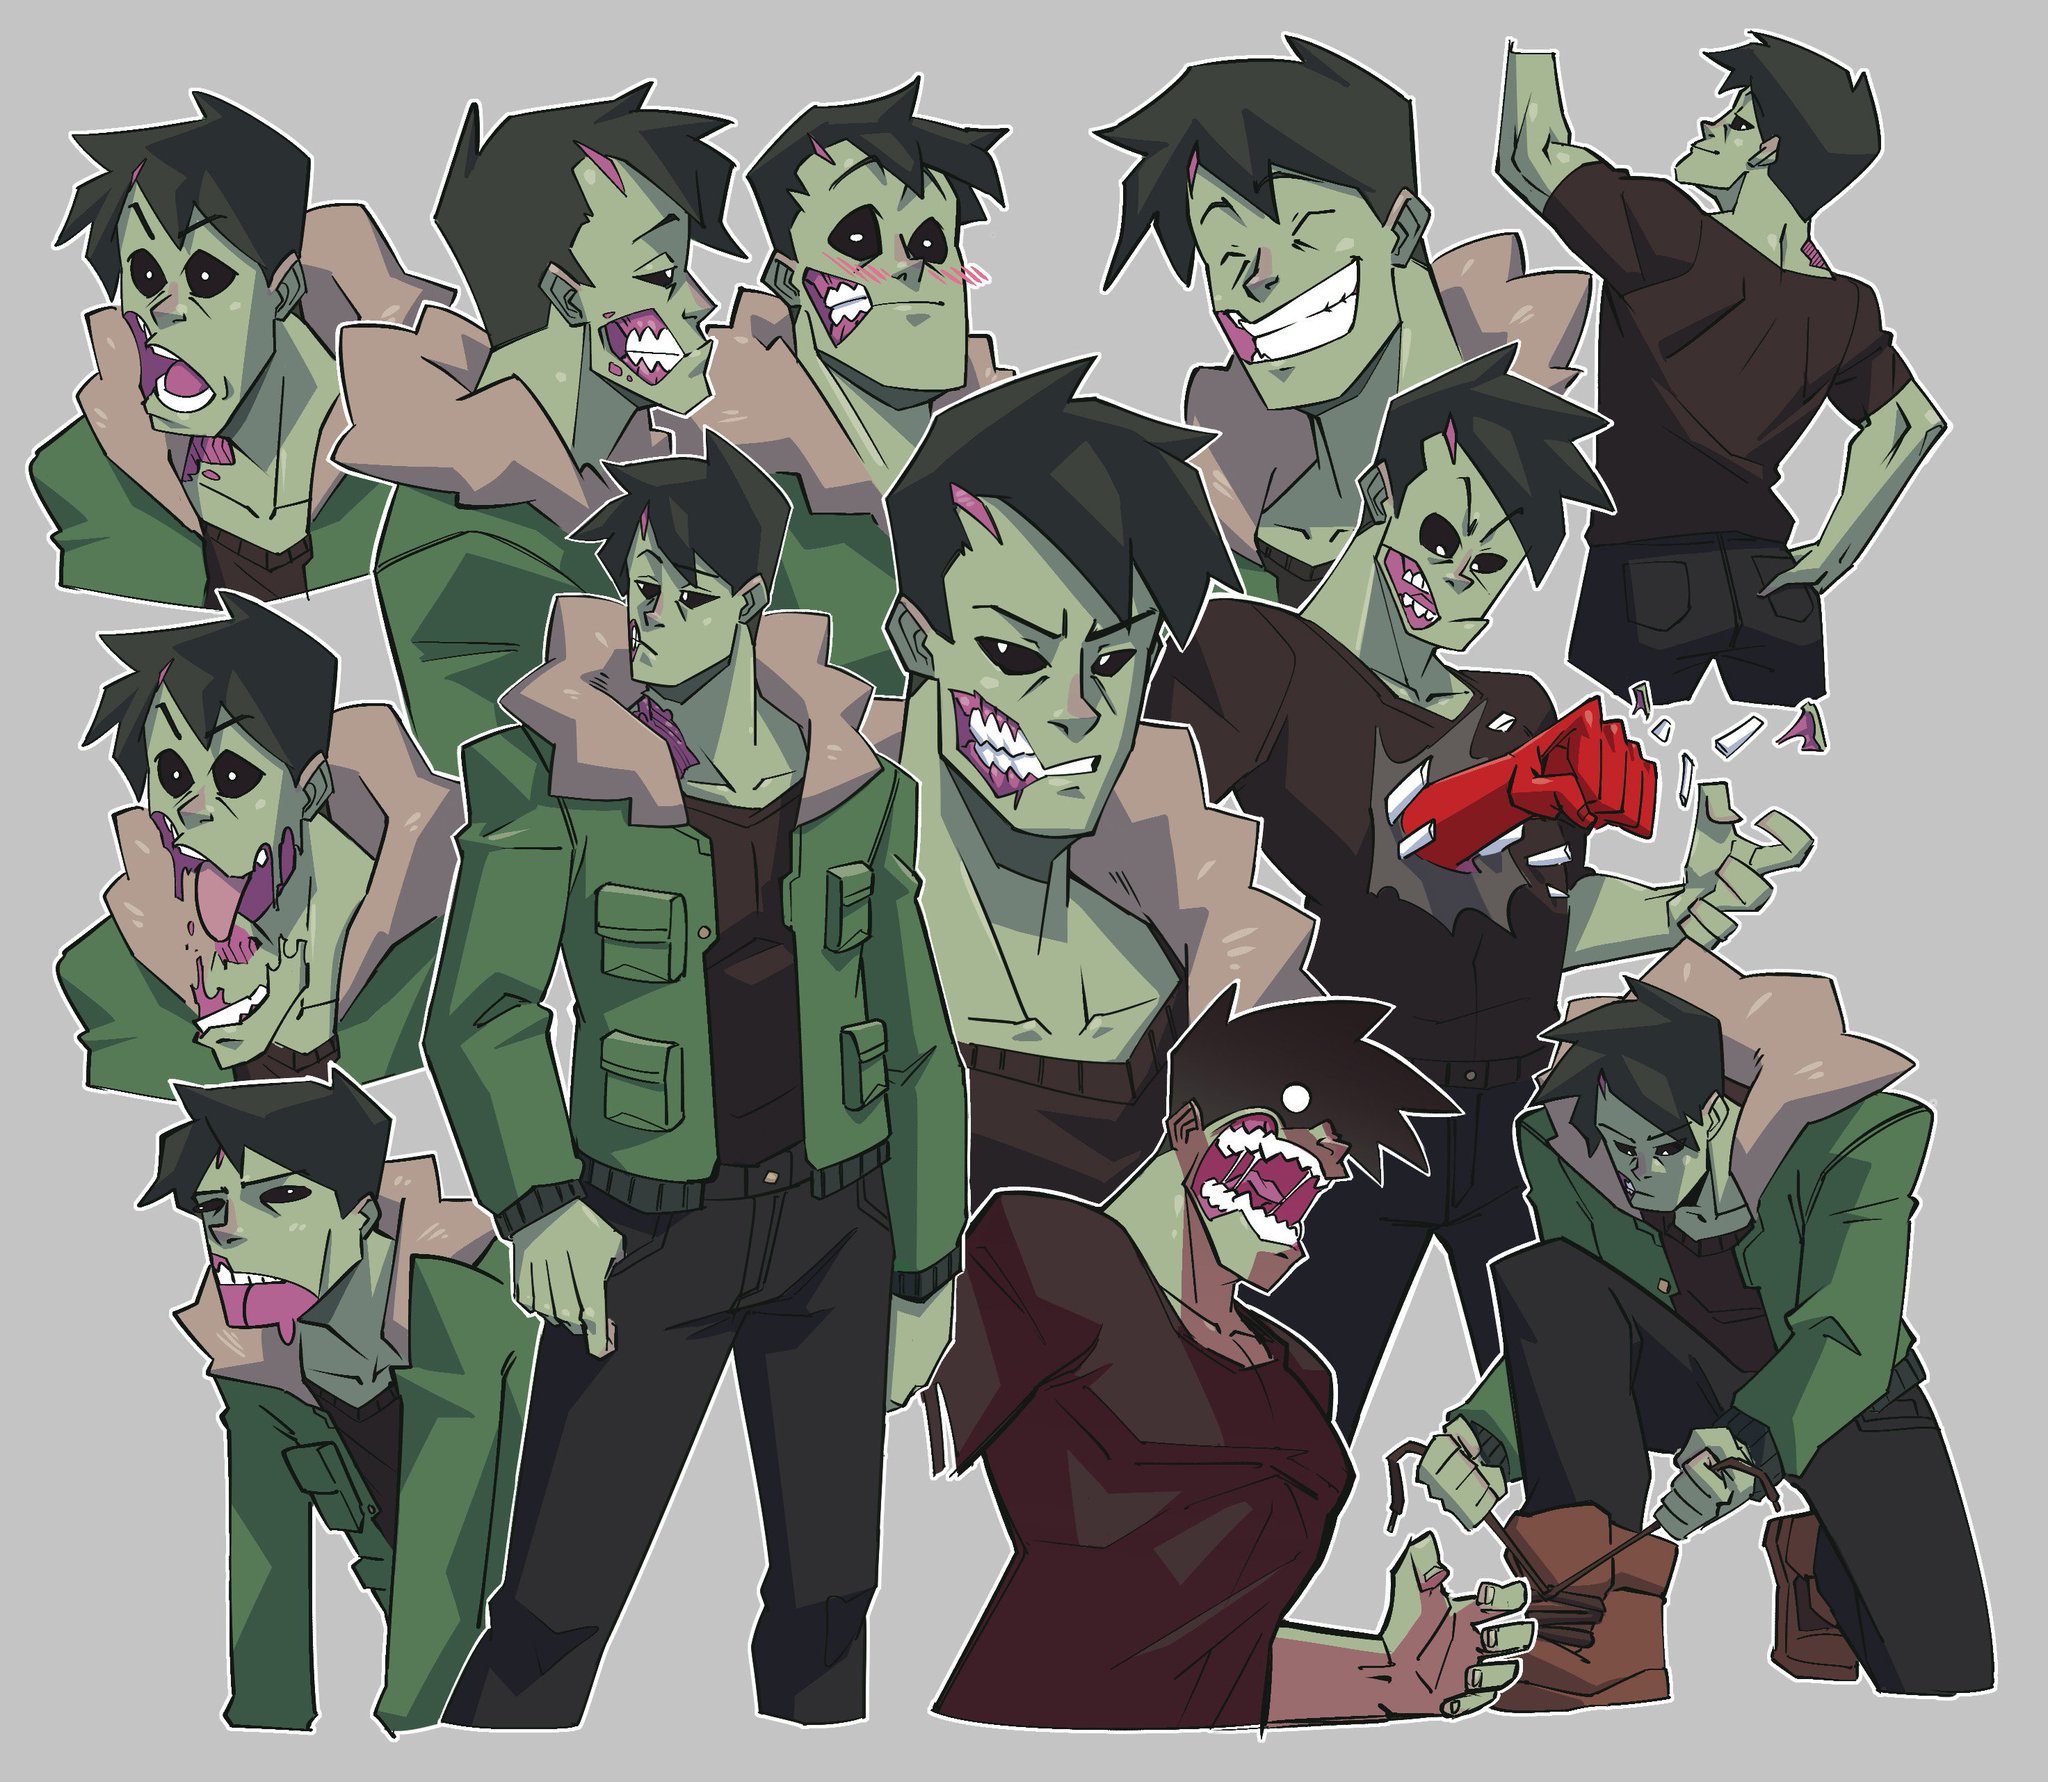 “Been playing monster prom as of late and thought I'd draw my boy Brian...